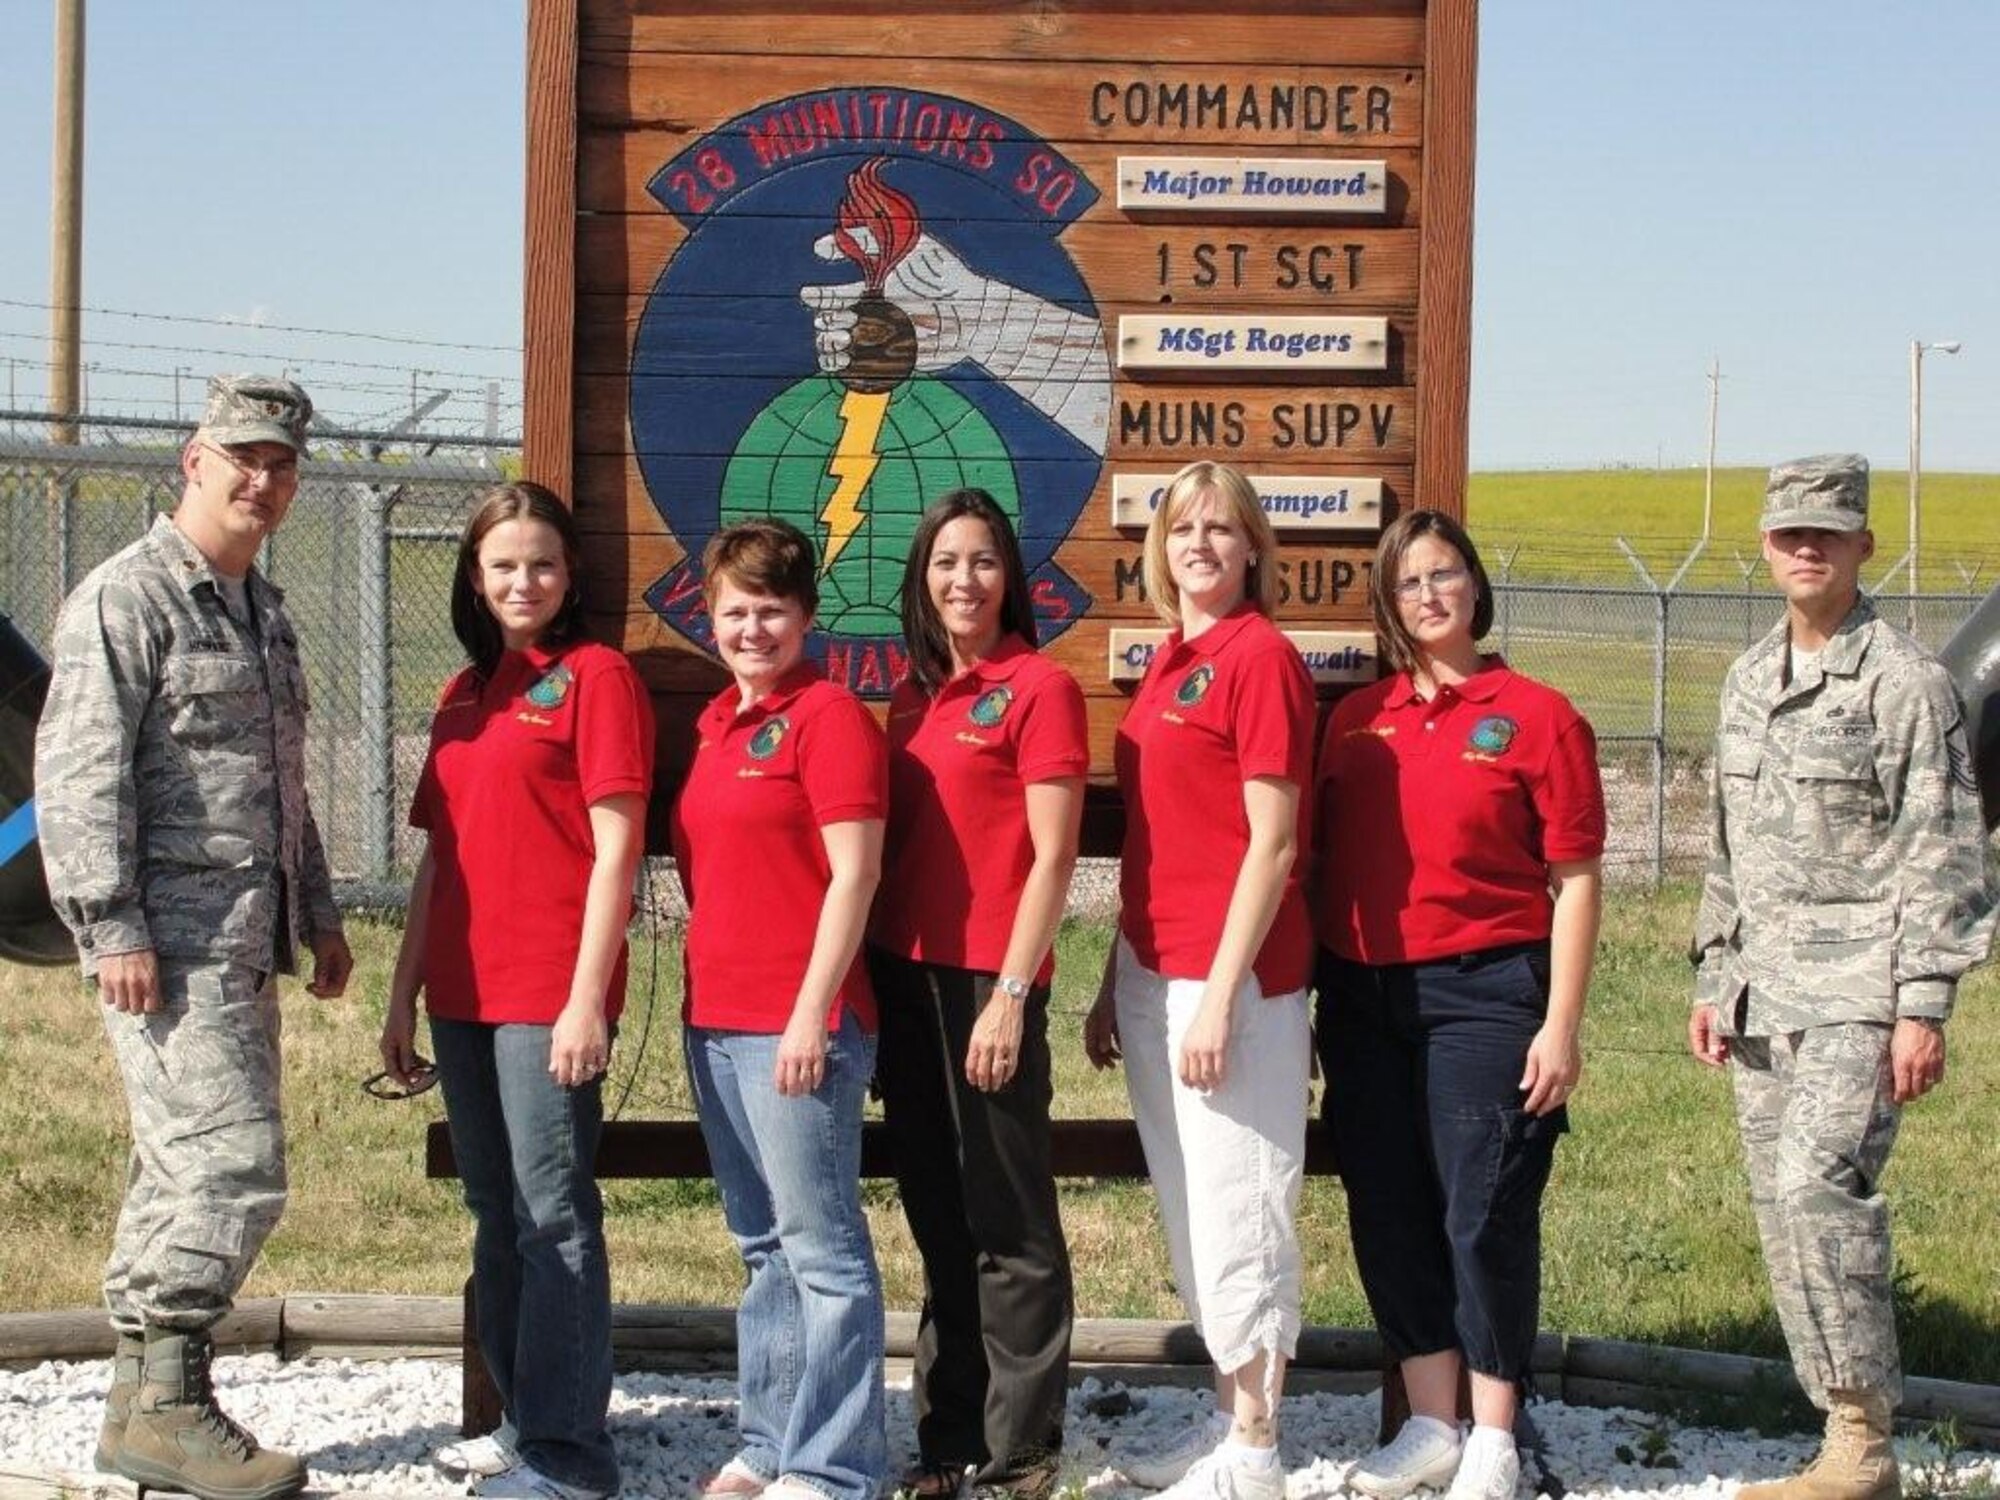 Members of the 28th Munitions Squadron Key Spouse program pose for group photo. The Key Spouse Program is drastically different from a traditional spouse’s group in that organizational leadership empowers a volunteer to assist with quality of life programs and services directed at the family members. (Courtesy photo)